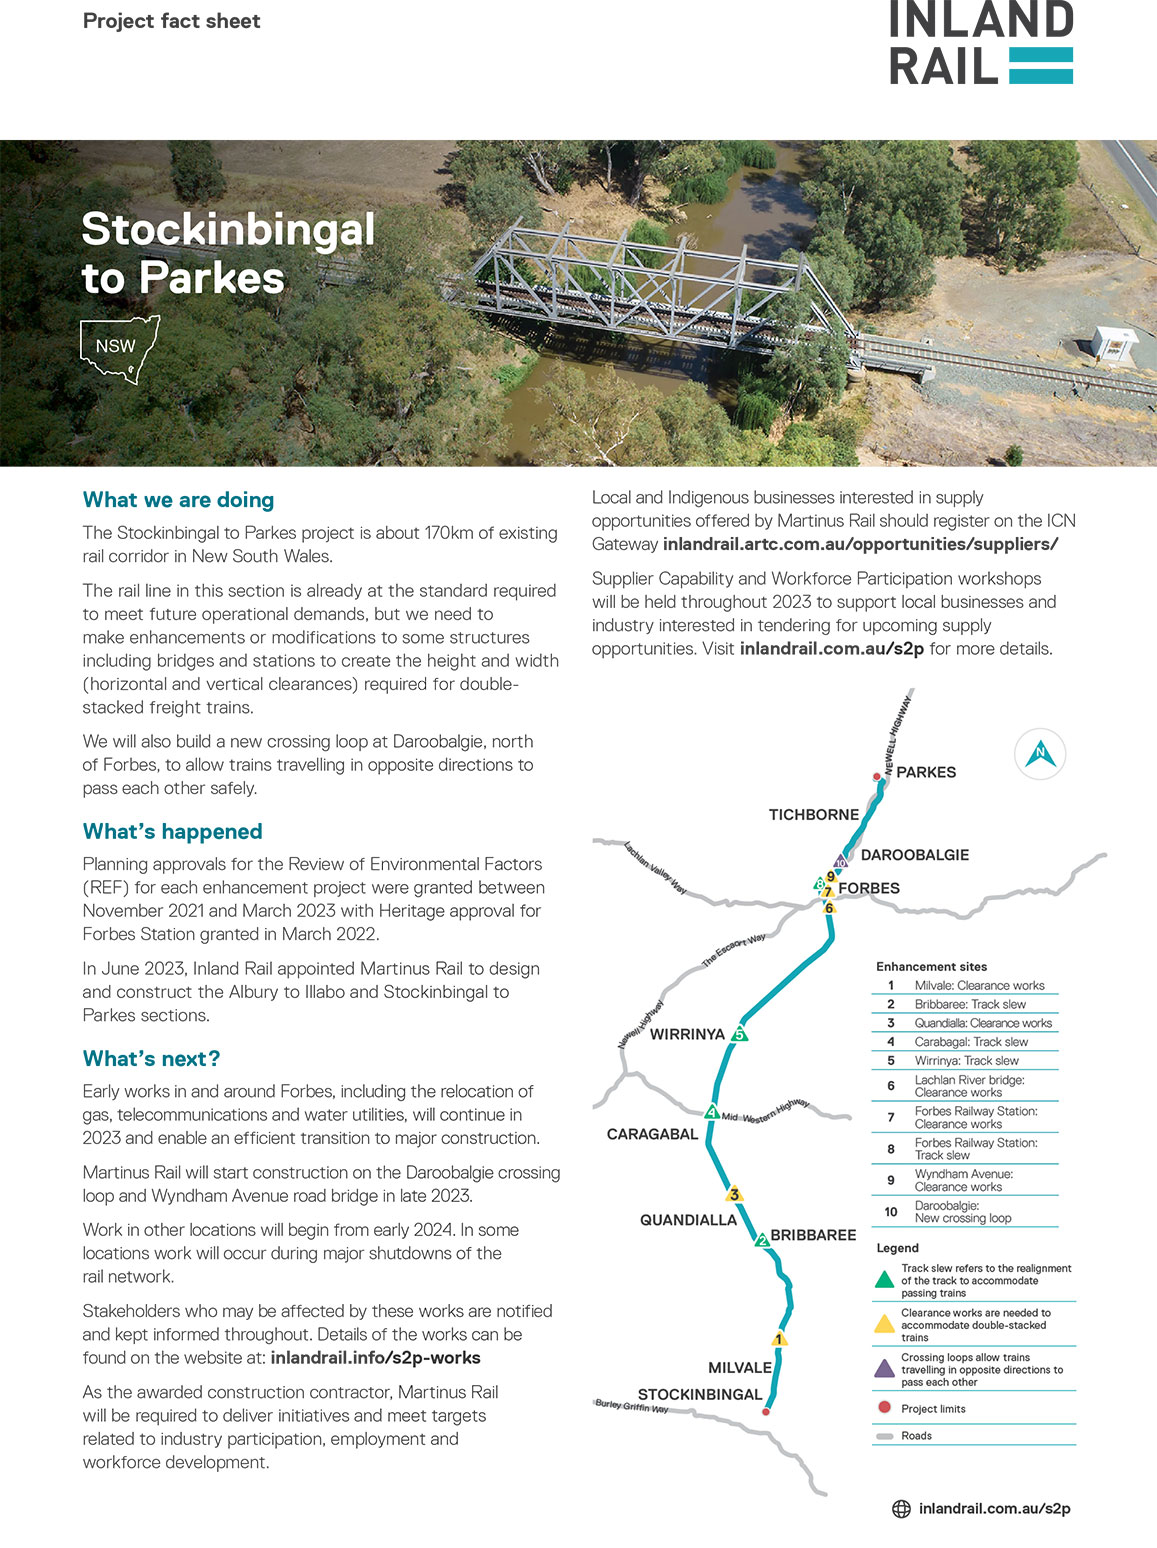 Image thumbnail for Stockinbingal to Parkes project fact sheet